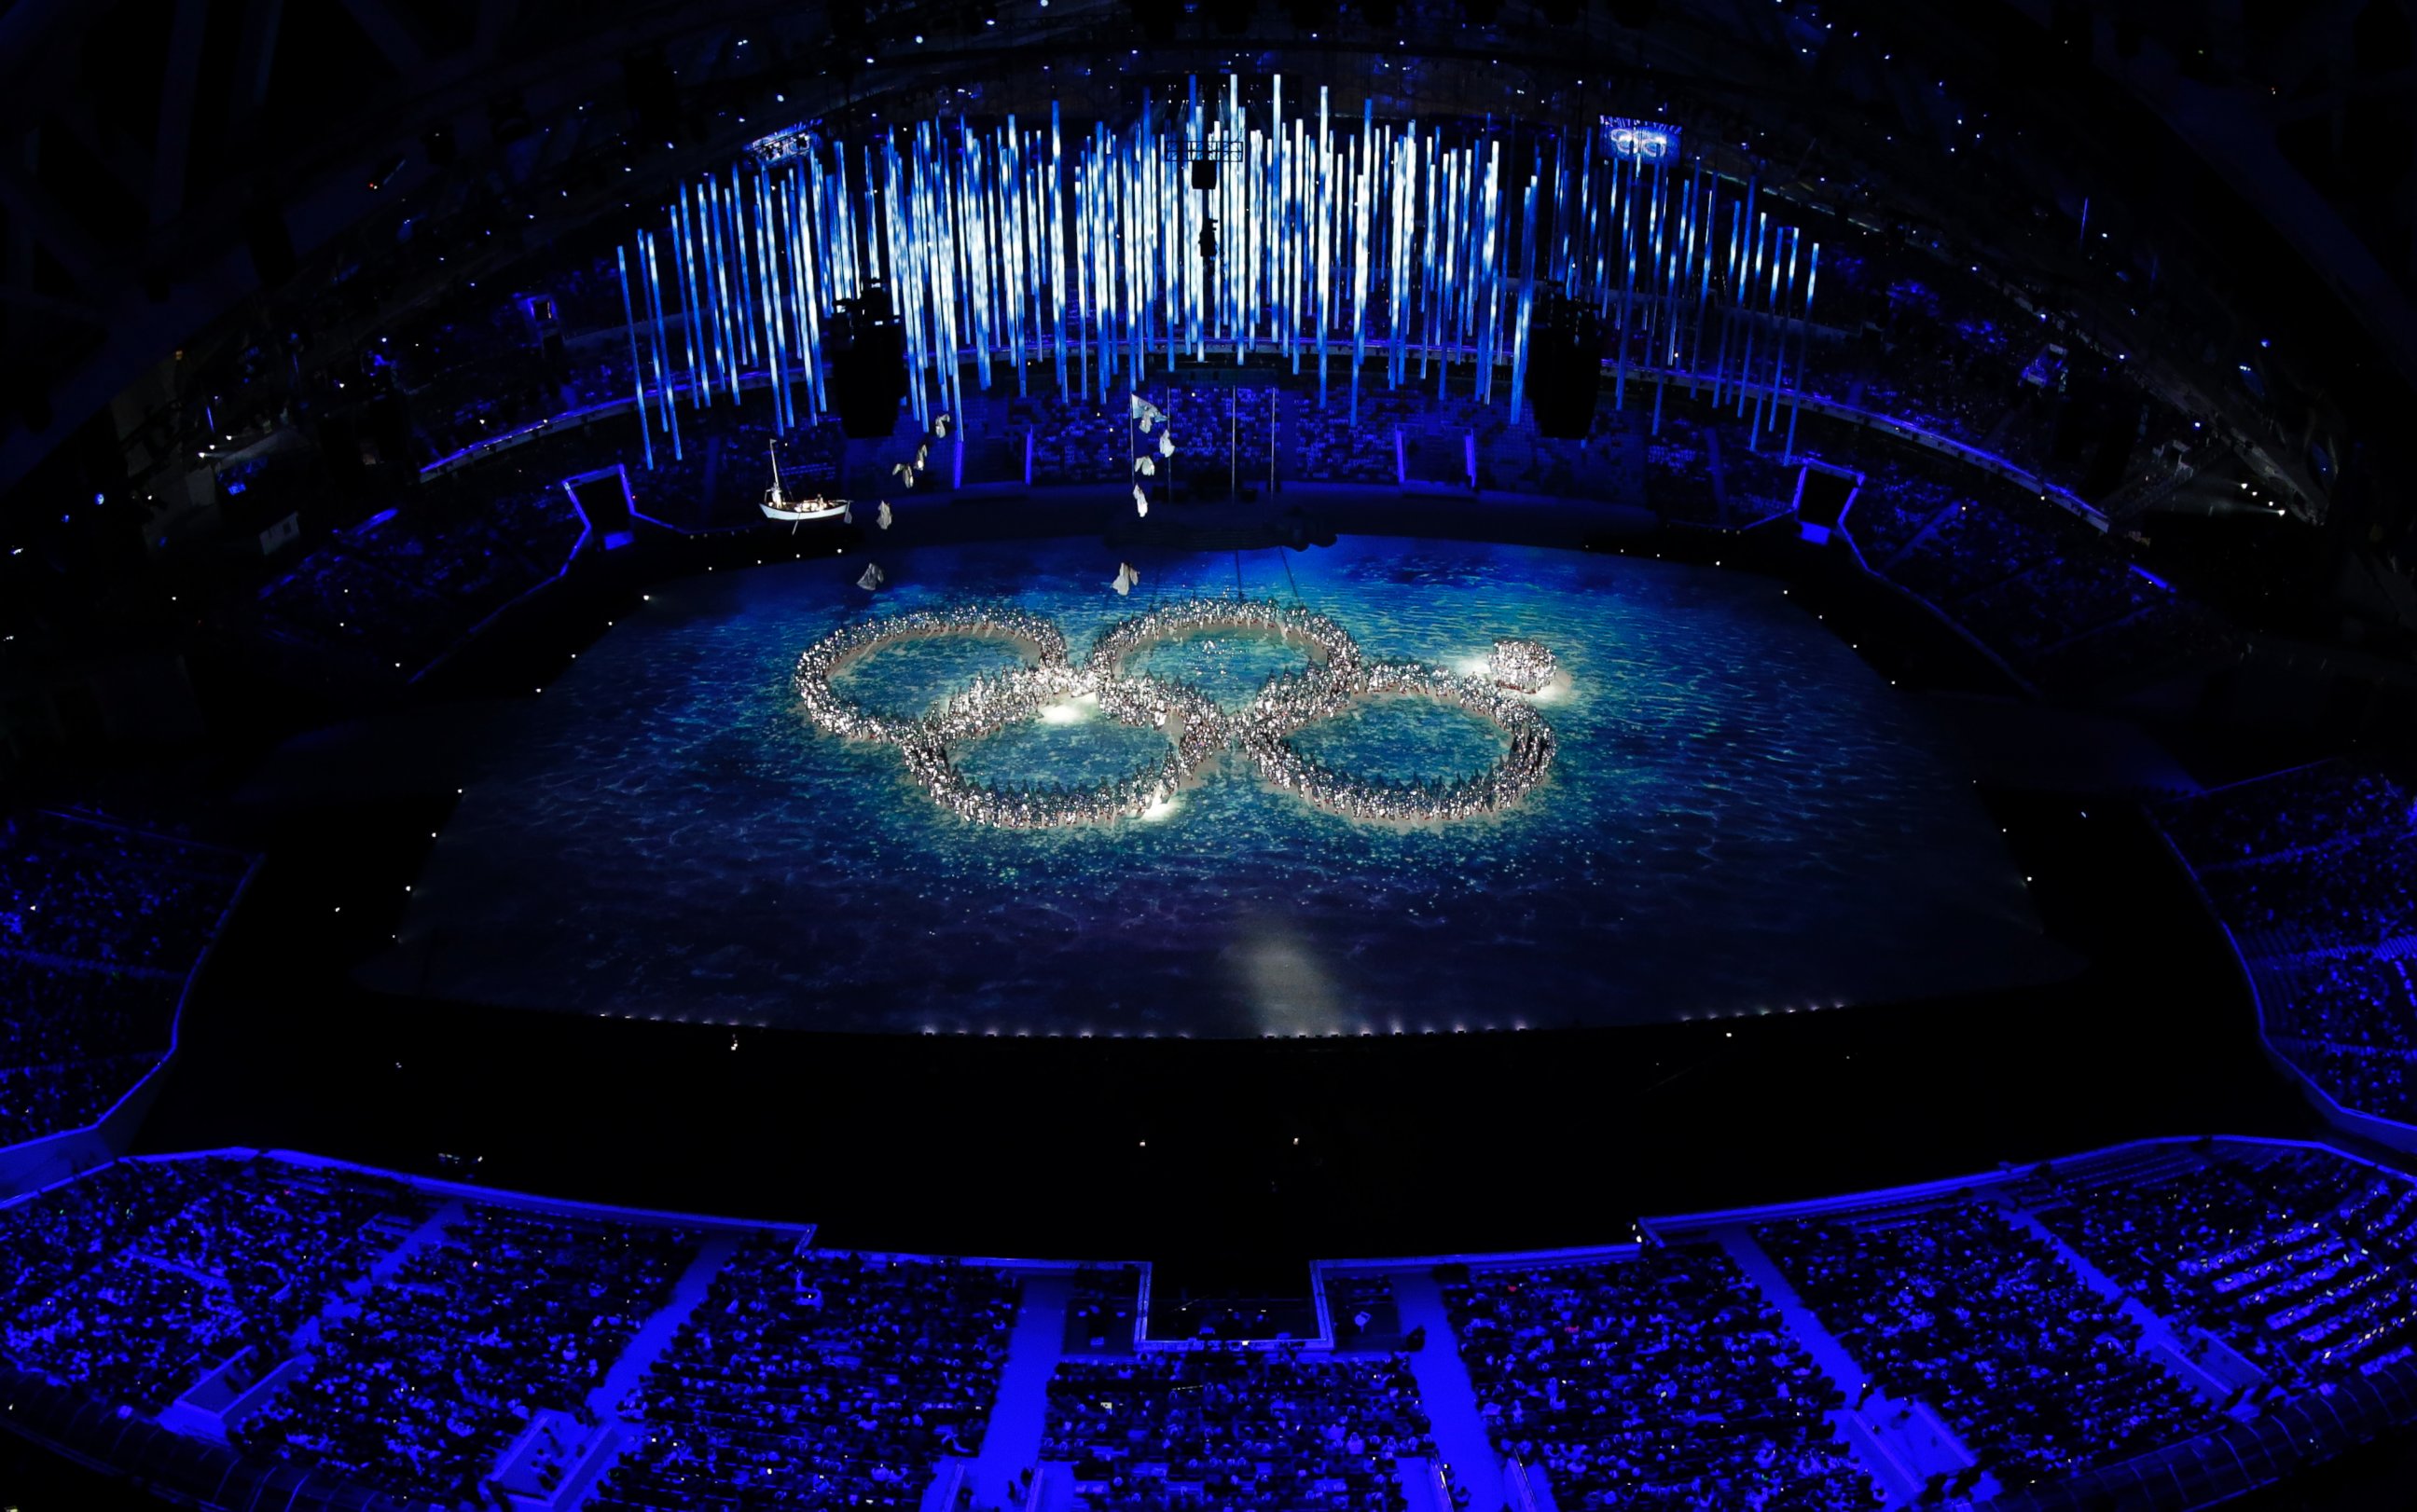 PHOTO: Performers recreate the ring that did not open during the opening ceremony during the closing ceremony of the 2014 Winter Olympics, Sunday, Feb. 23, 2014, in Sochi, Russia.